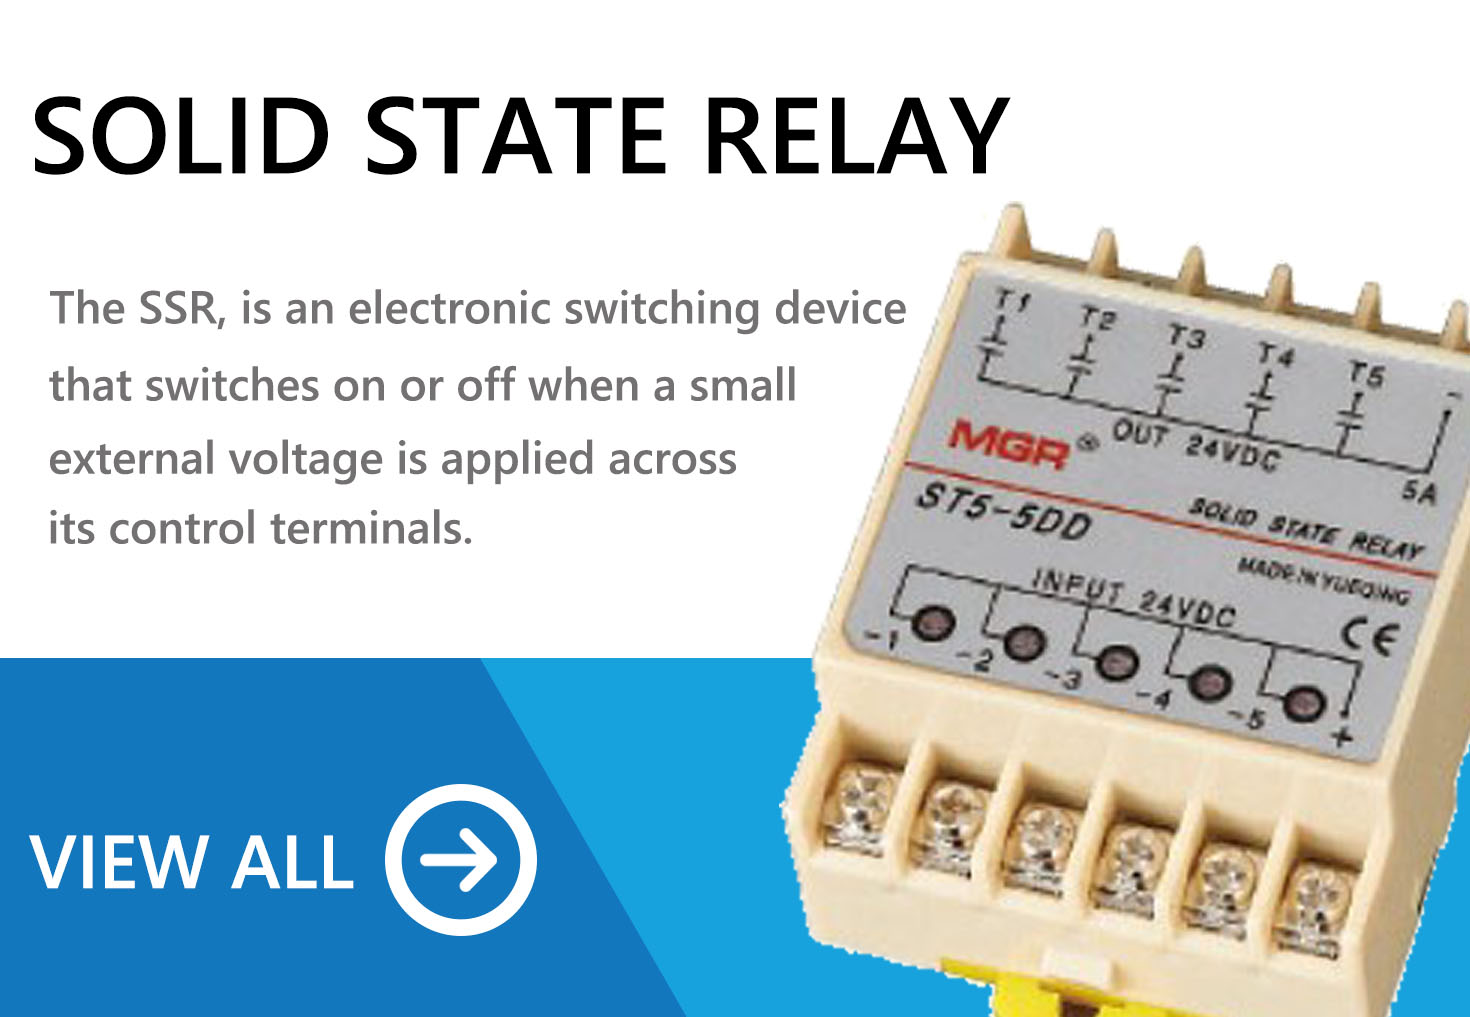 SPECIAL SOLID STATE RELAY